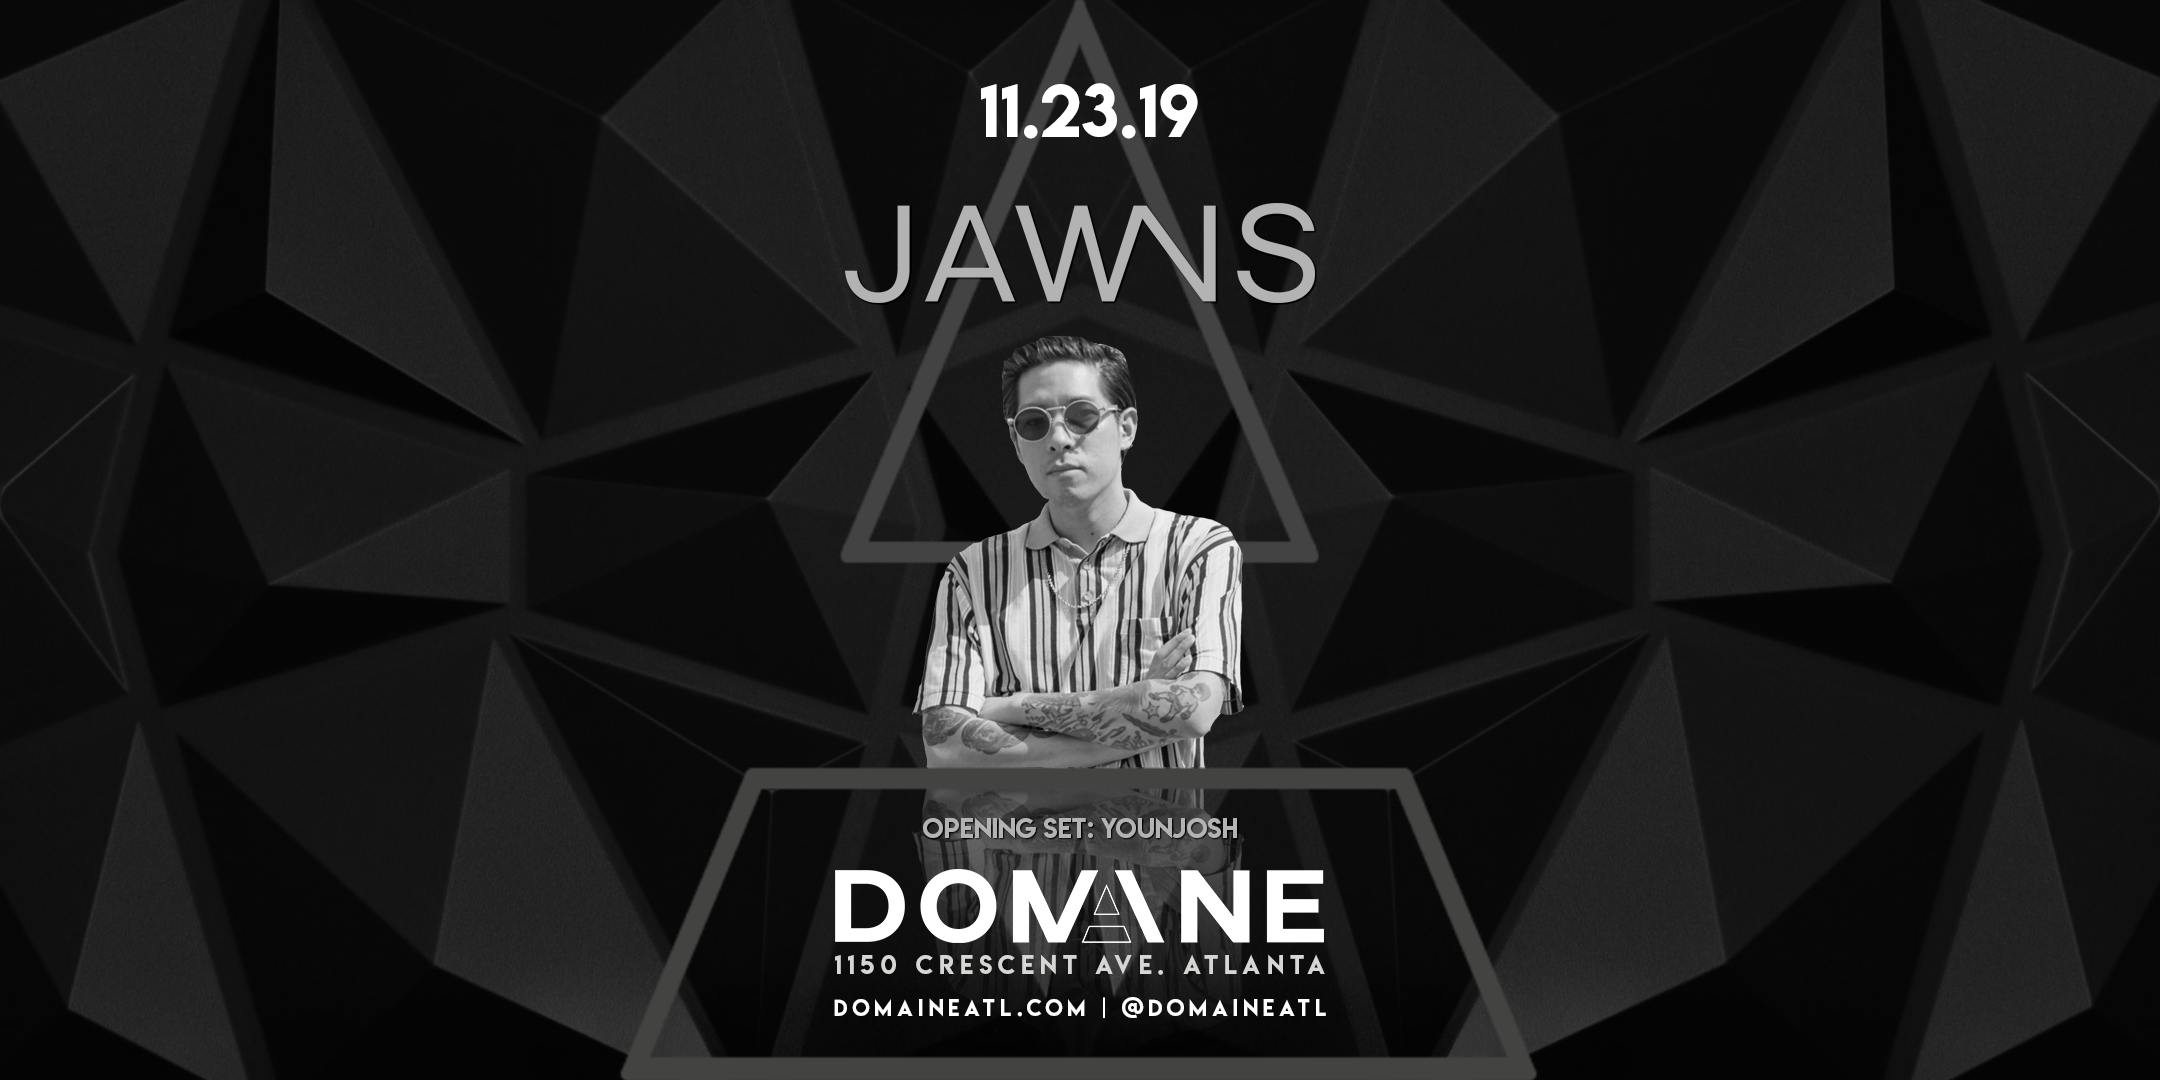 Domaine Fridays with JAWNS on Saturday 11.23.19